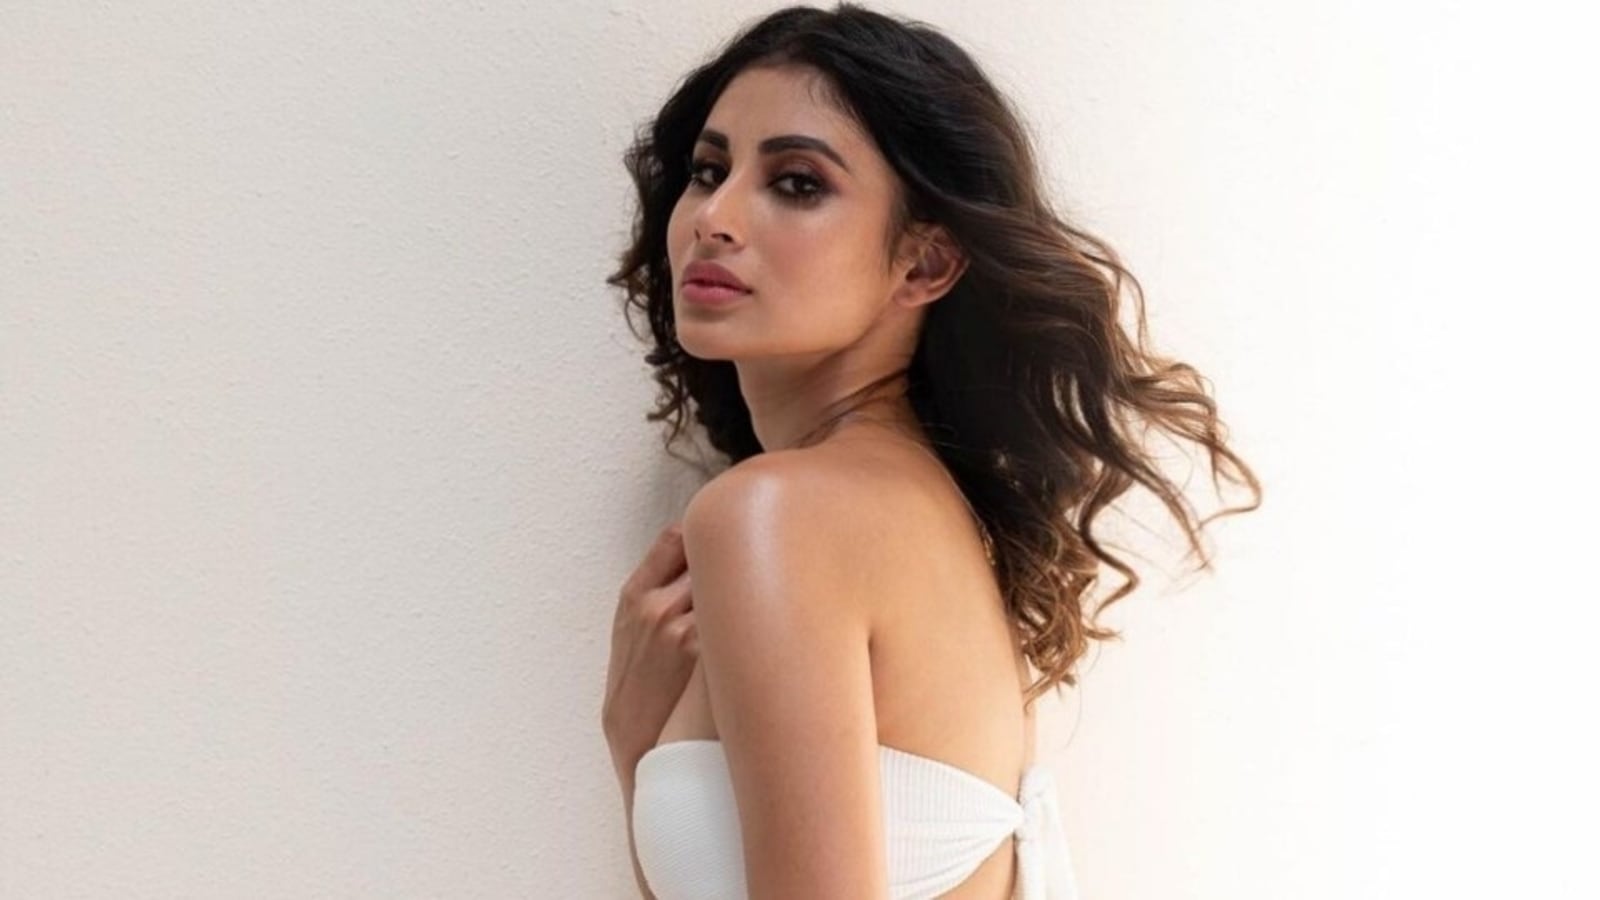 Mouni Roy drops a smoking hot look in white bikini and fringed skirt, sets  Instagram on fire | Fashion Trends - Hindustan Times